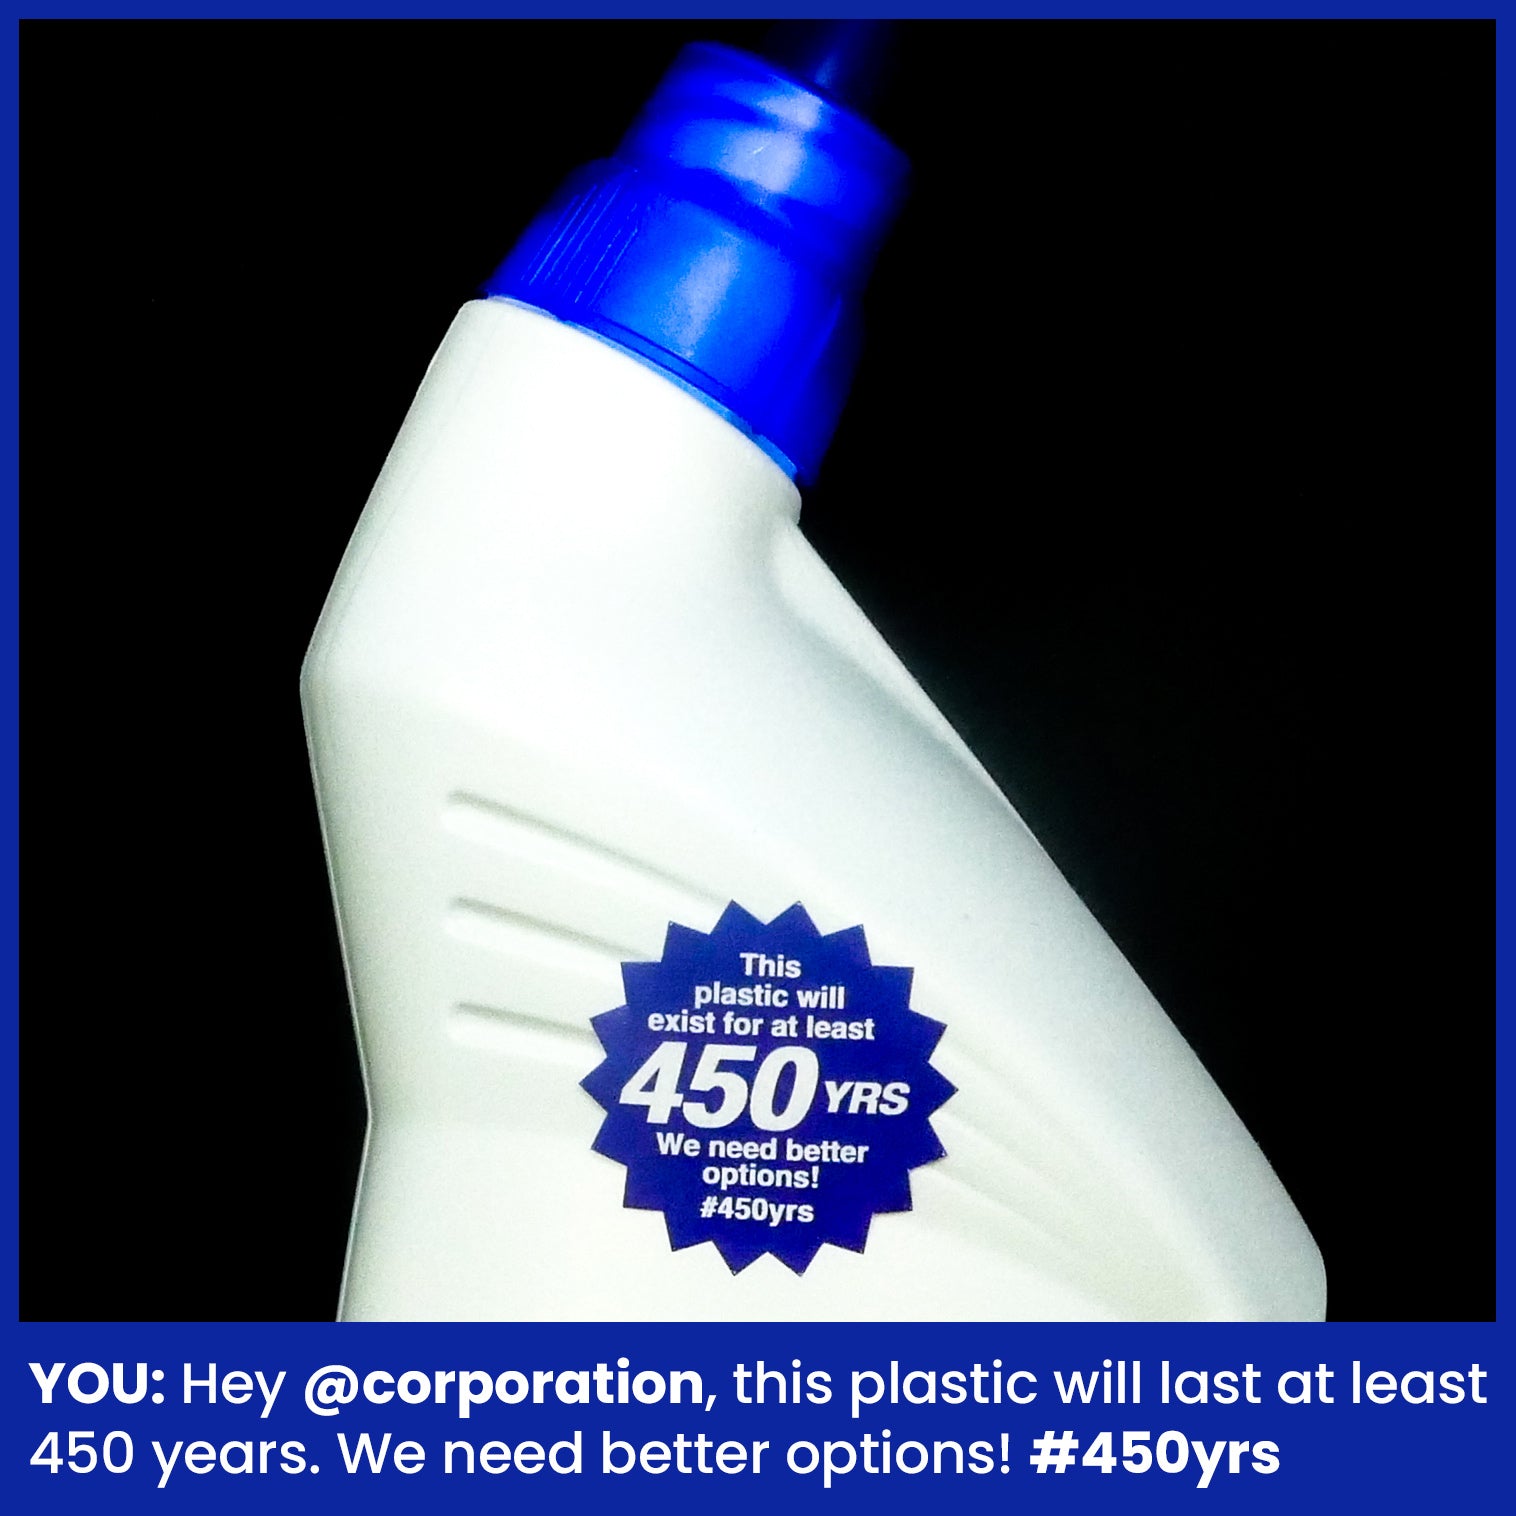 Photograph of a white, single-use plastic bottle with a blue, starburst-shaped 1.25 inch sticker on it that says: 'This plastic will exist for at least 450 years. We need better options #450yrs.'